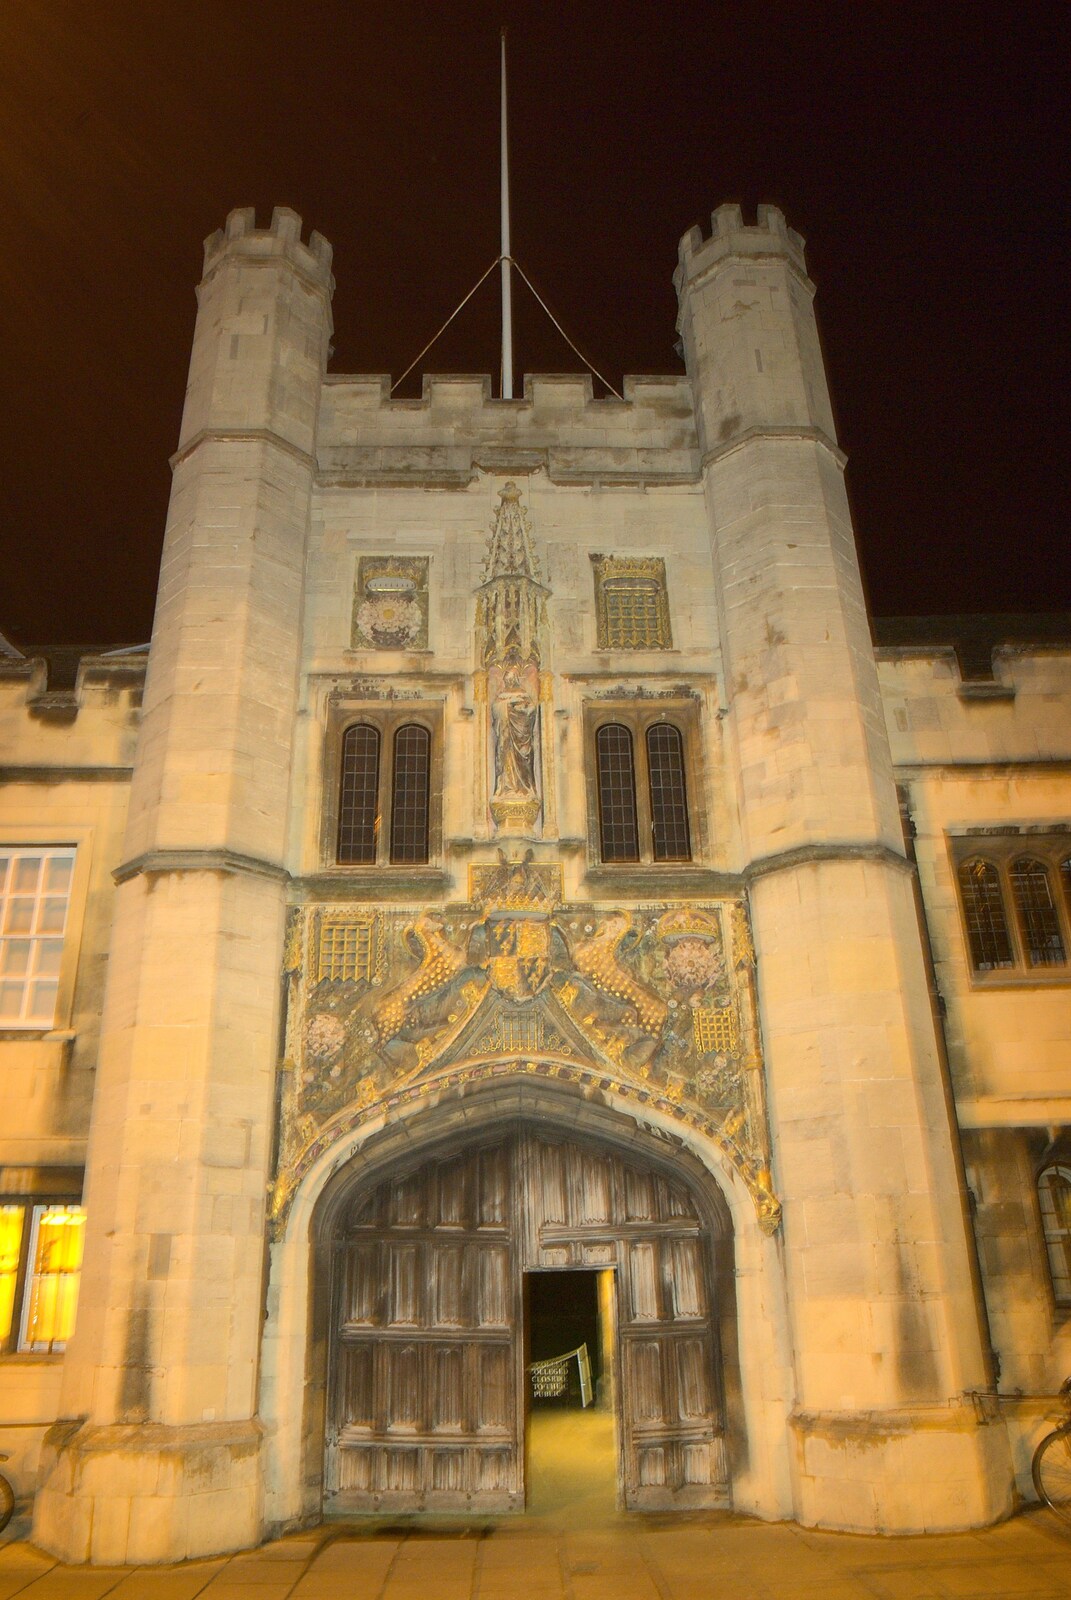 Christ's entrance on the end of Sydney Street from A Qualcomm Christmas, Christ's College, Cambridge - 8th December 2011